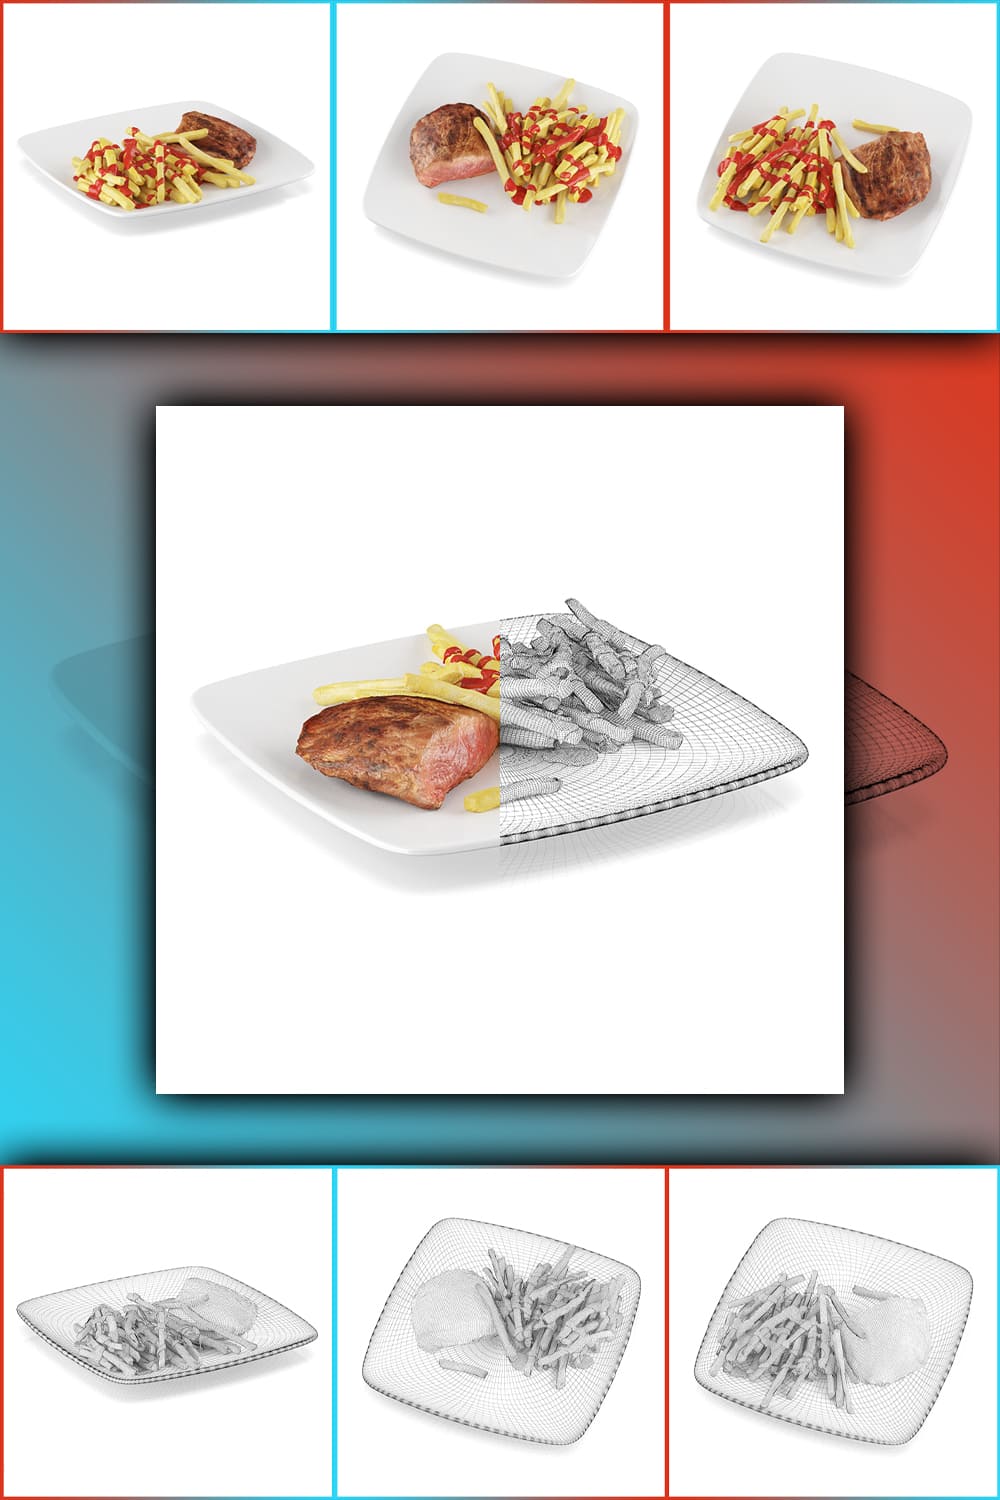 Gray and color 3D models of french fries and meat are shown in parallel.